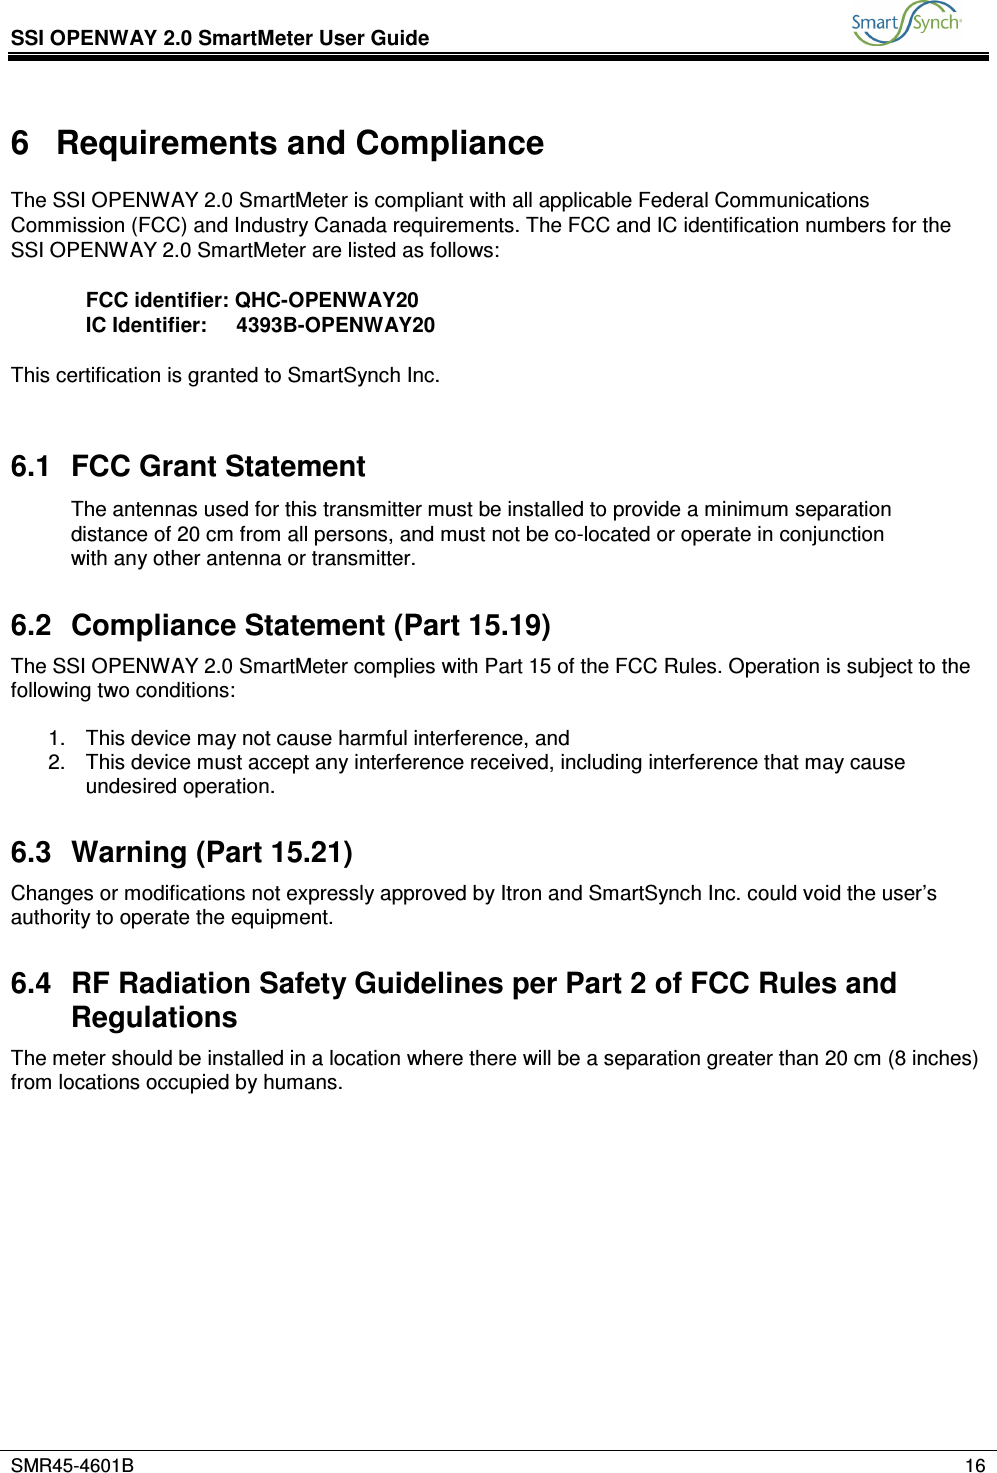 SSI OPENWAY 2.0 SmartMeter User Guide           SMR45-4601B    16  6  Requirements and Compliance The SSI OPENWAY 2.0 SmartMeter is compliant with all applicable Federal Communications Commission (FCC) and Industry Canada requirements. The FCC and IC identification numbers for the SSI OPENWAY 2.0 SmartMeter are listed as follows:  FCC identifier: QHC-OPENWAY20 IC Identifier:     4393B-OPENWAY20  This certification is granted to SmartSynch Inc.  6.1  FCC Grant Statement The antennas used for this transmitter must be installed to provide a minimum separation distance of 20 cm from all persons, and must not be co-located or operate in conjunction with any other antenna or transmitter.  6.2  Compliance Statement (Part 15.19) The SSI OPENWAY 2.0 SmartMeter complies with Part 15 of the FCC Rules. Operation is subject to the following two conditions:  1.  This device may not cause harmful interference, and 2.  This device must accept any interference received, including interference that may cause undesired operation. 6.3  Warning (Part 15.21) Changes or modifications not expressly approved by Itron and SmartSynch Inc. could void the user’s authority to operate the equipment. 6.4  RF Radiation Safety Guidelines per Part 2 of FCC Rules and Regulations The meter should be installed in a location where there will be a separation greater than 20 cm (8 inches) from locations occupied by humans.            